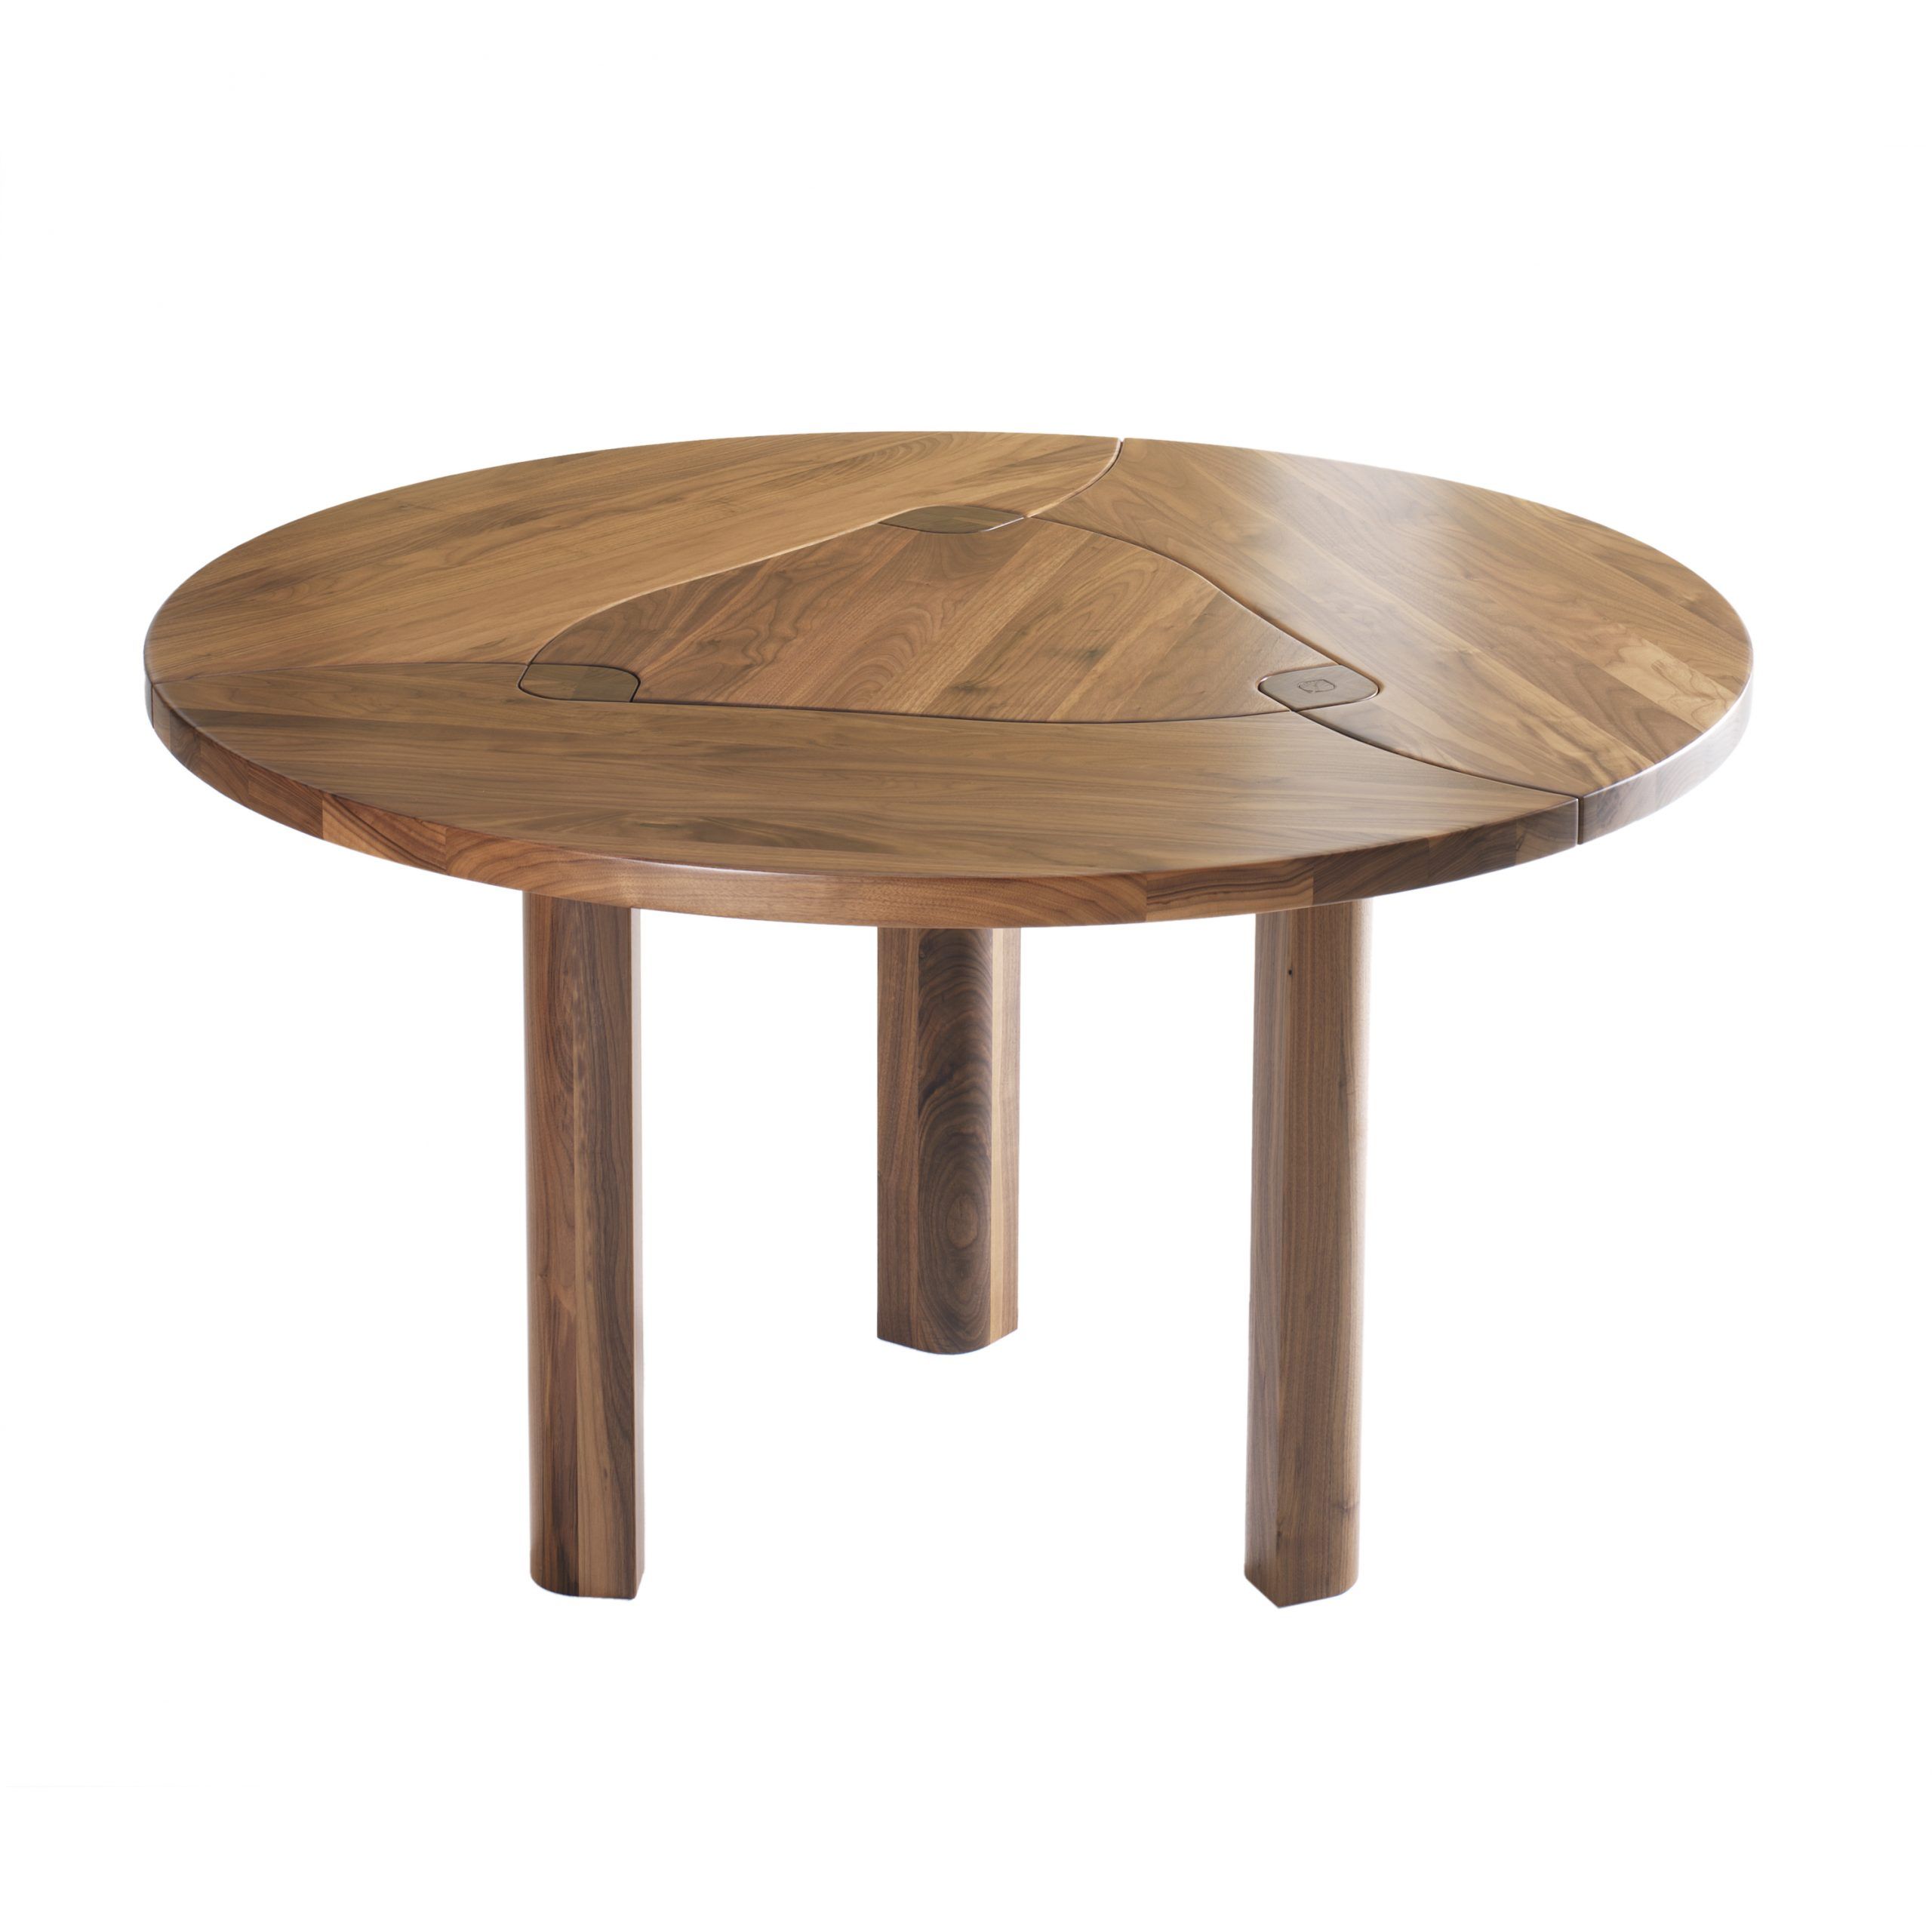 Newest Solid Wood Circular Dining Tables White With Regard To Glass Walnut Dining Table Choice Image – Round Dining Room (View 16 of 25)